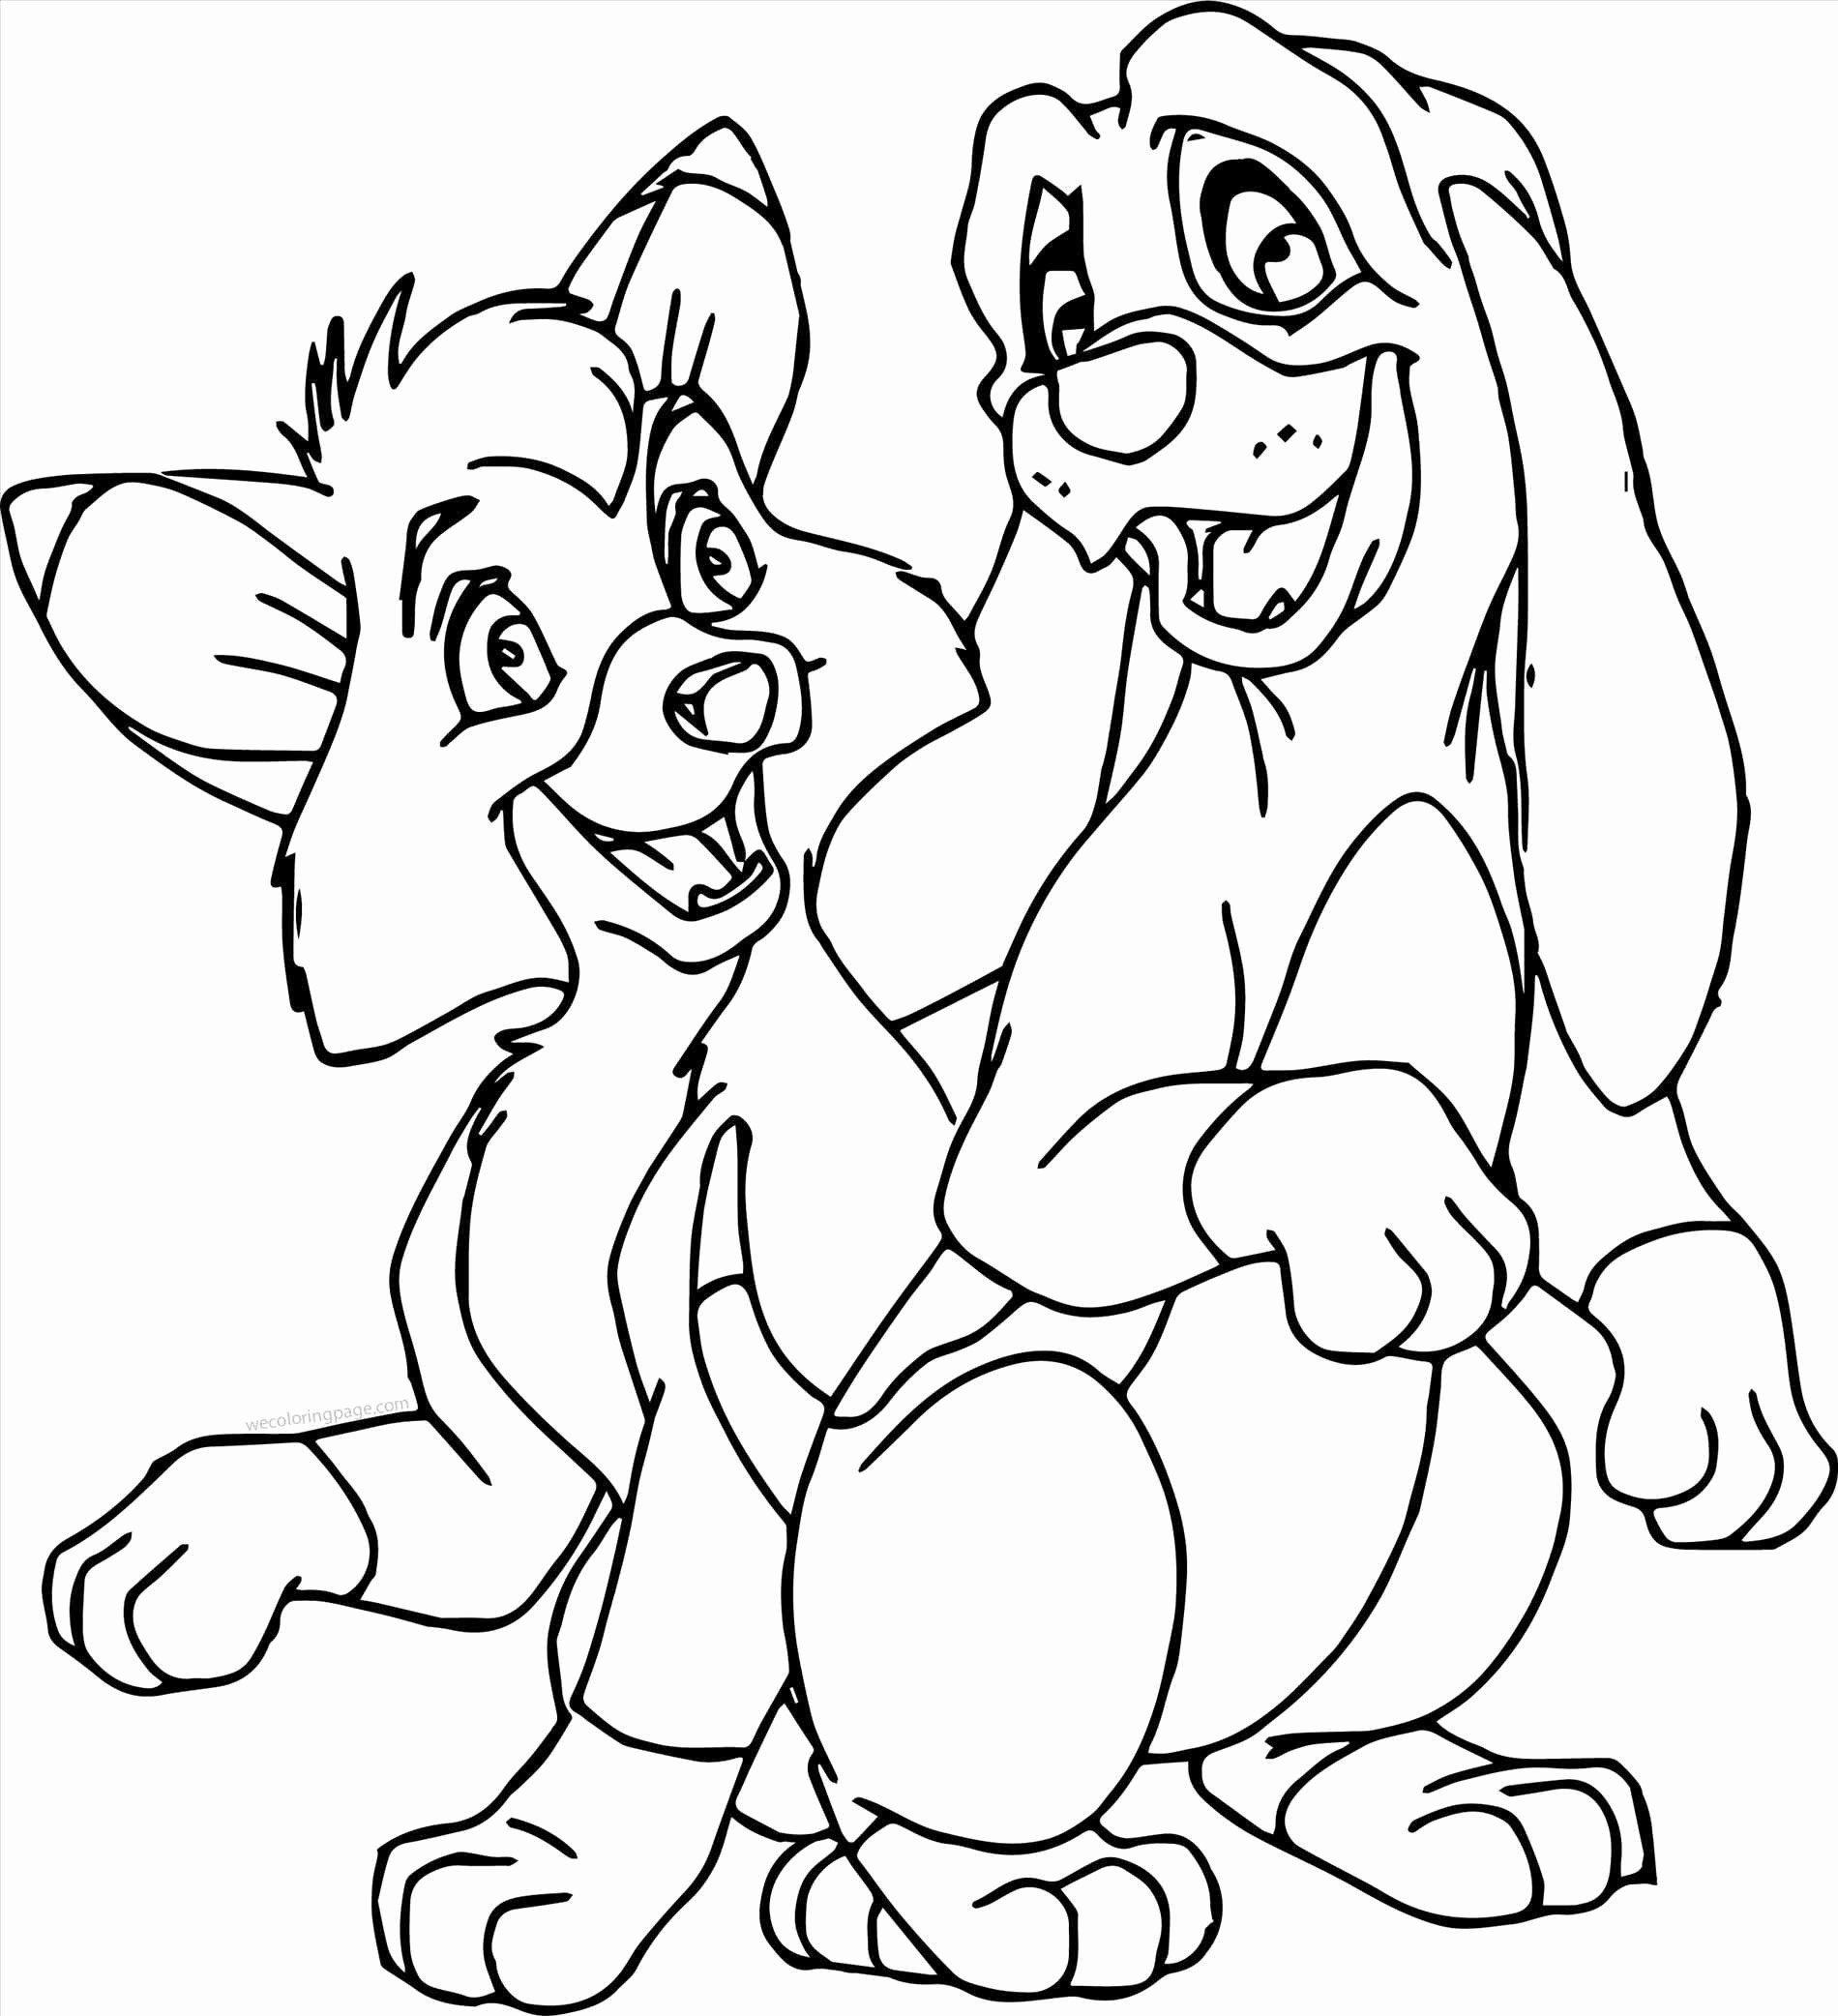 Coloring Pages Fox And The Hound Descendants 2s Fresh Attractive Fox And The Hound 2